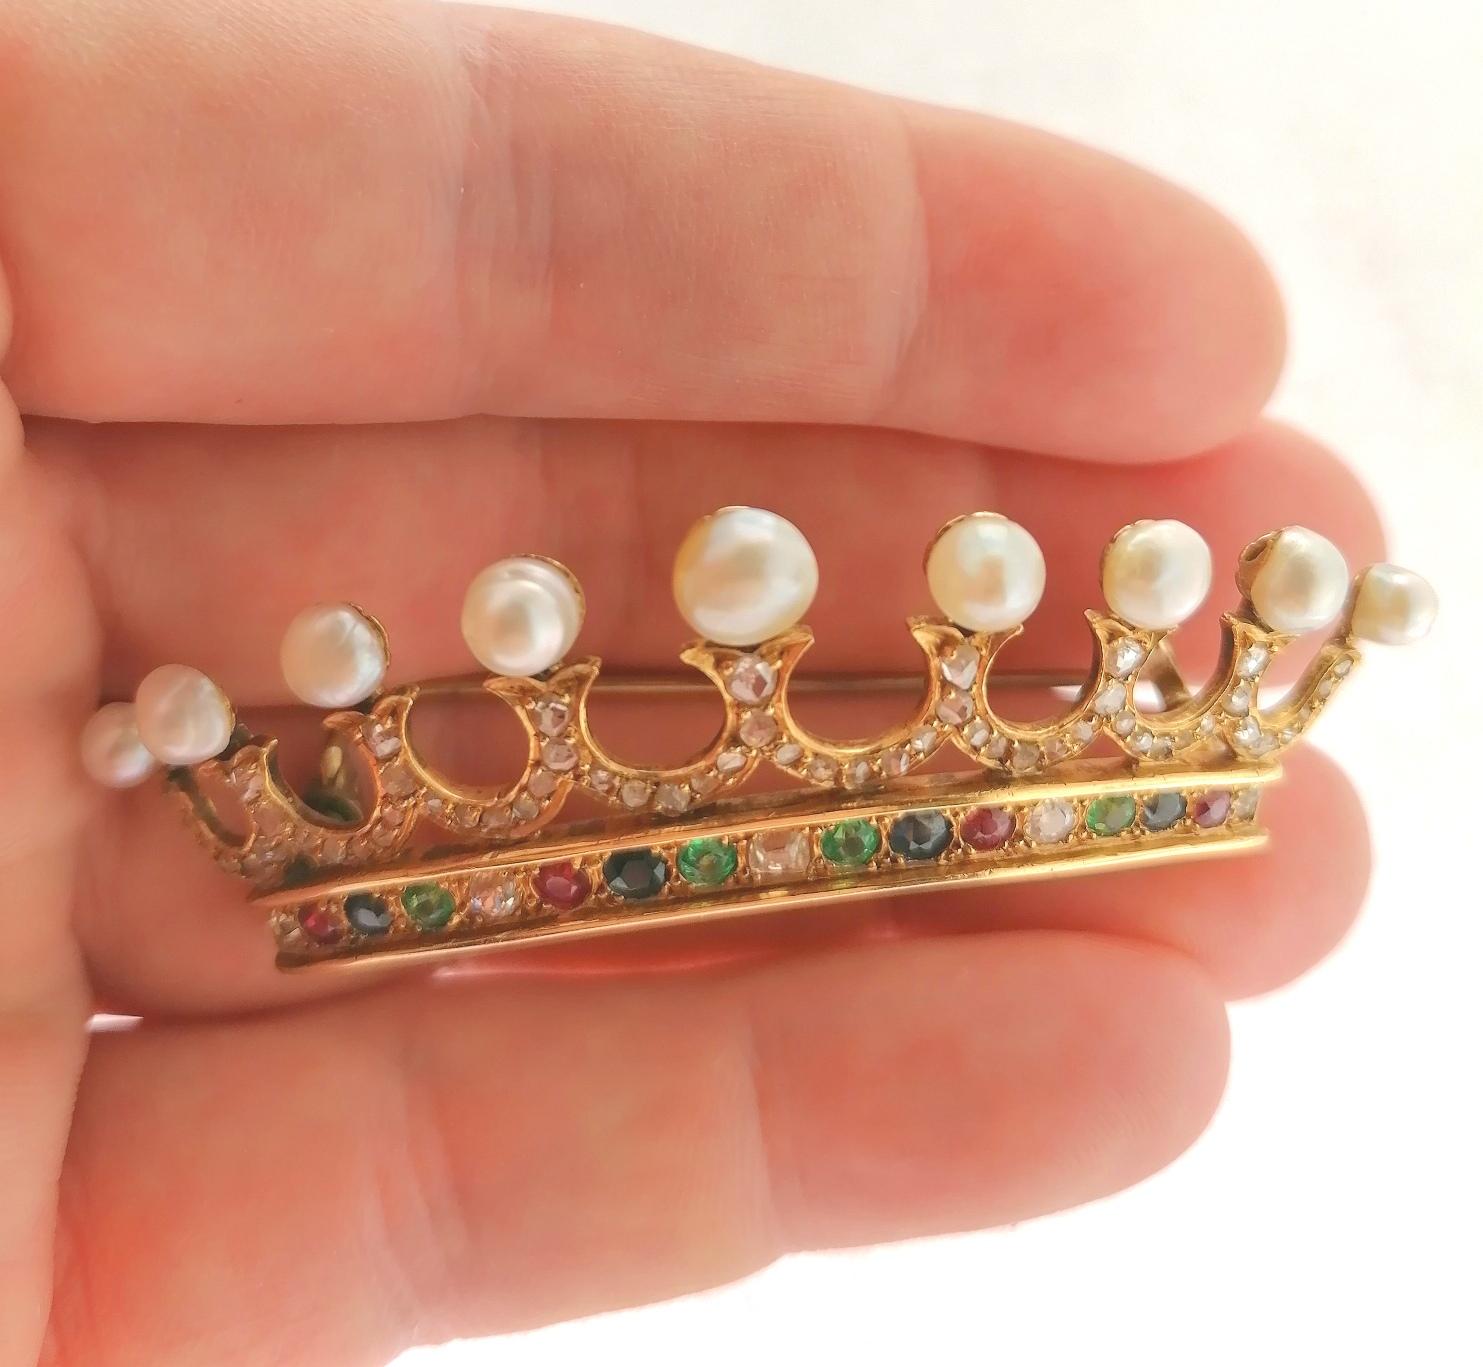 Colored Stones Natural Pearls Rose Cut Diamonds 18k Yellow Gold Crown Brooch For Sale 1